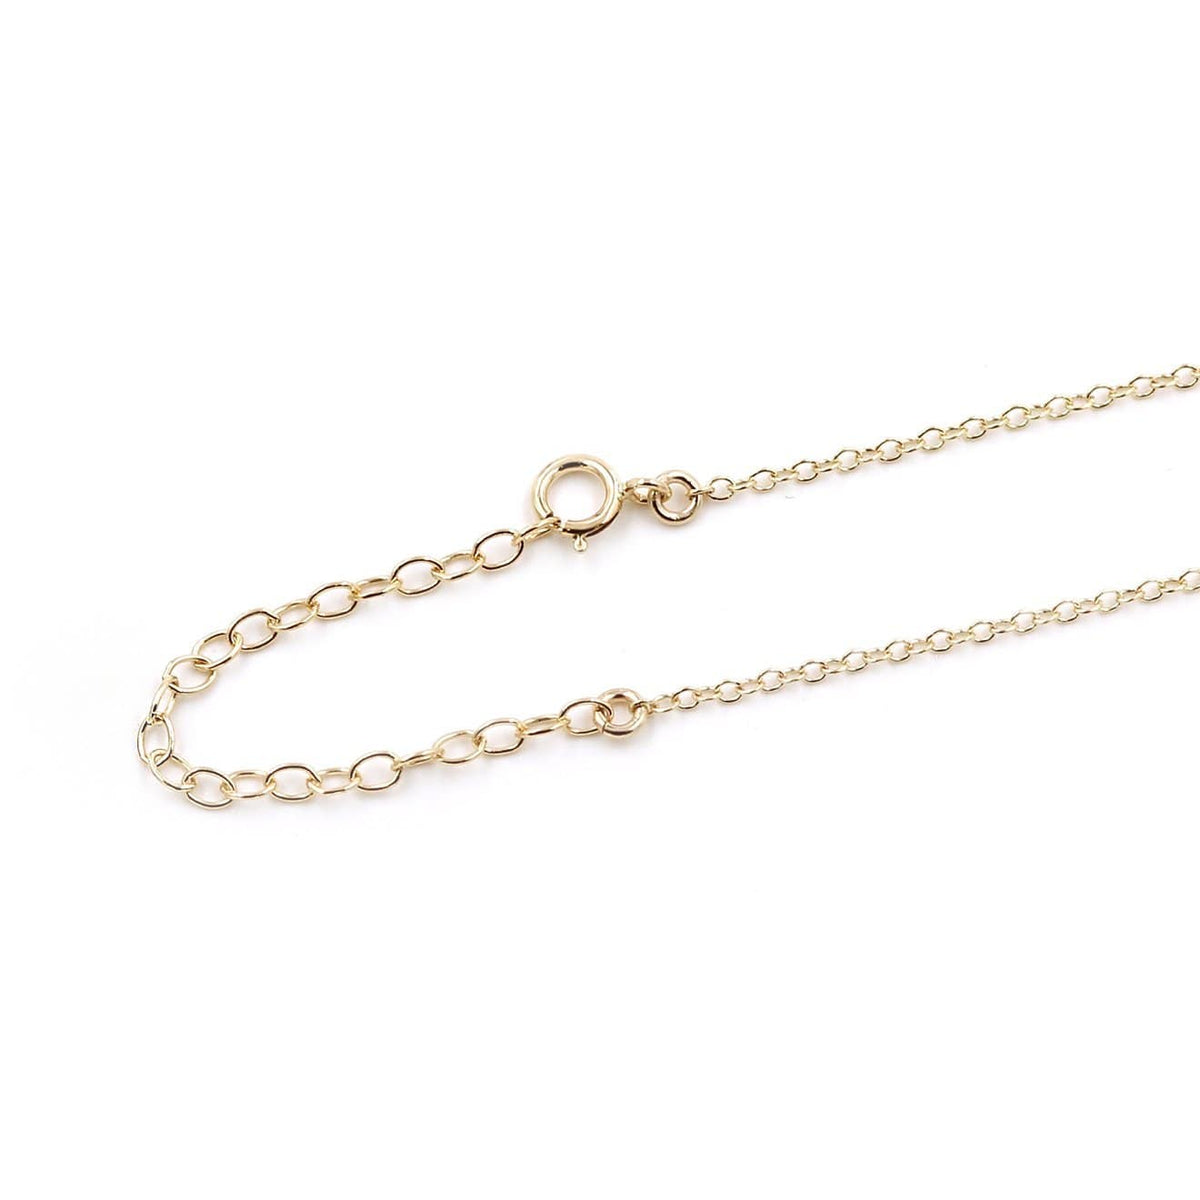 Detailed view of MaeMae Gold Necklace Chain and extender clasp.